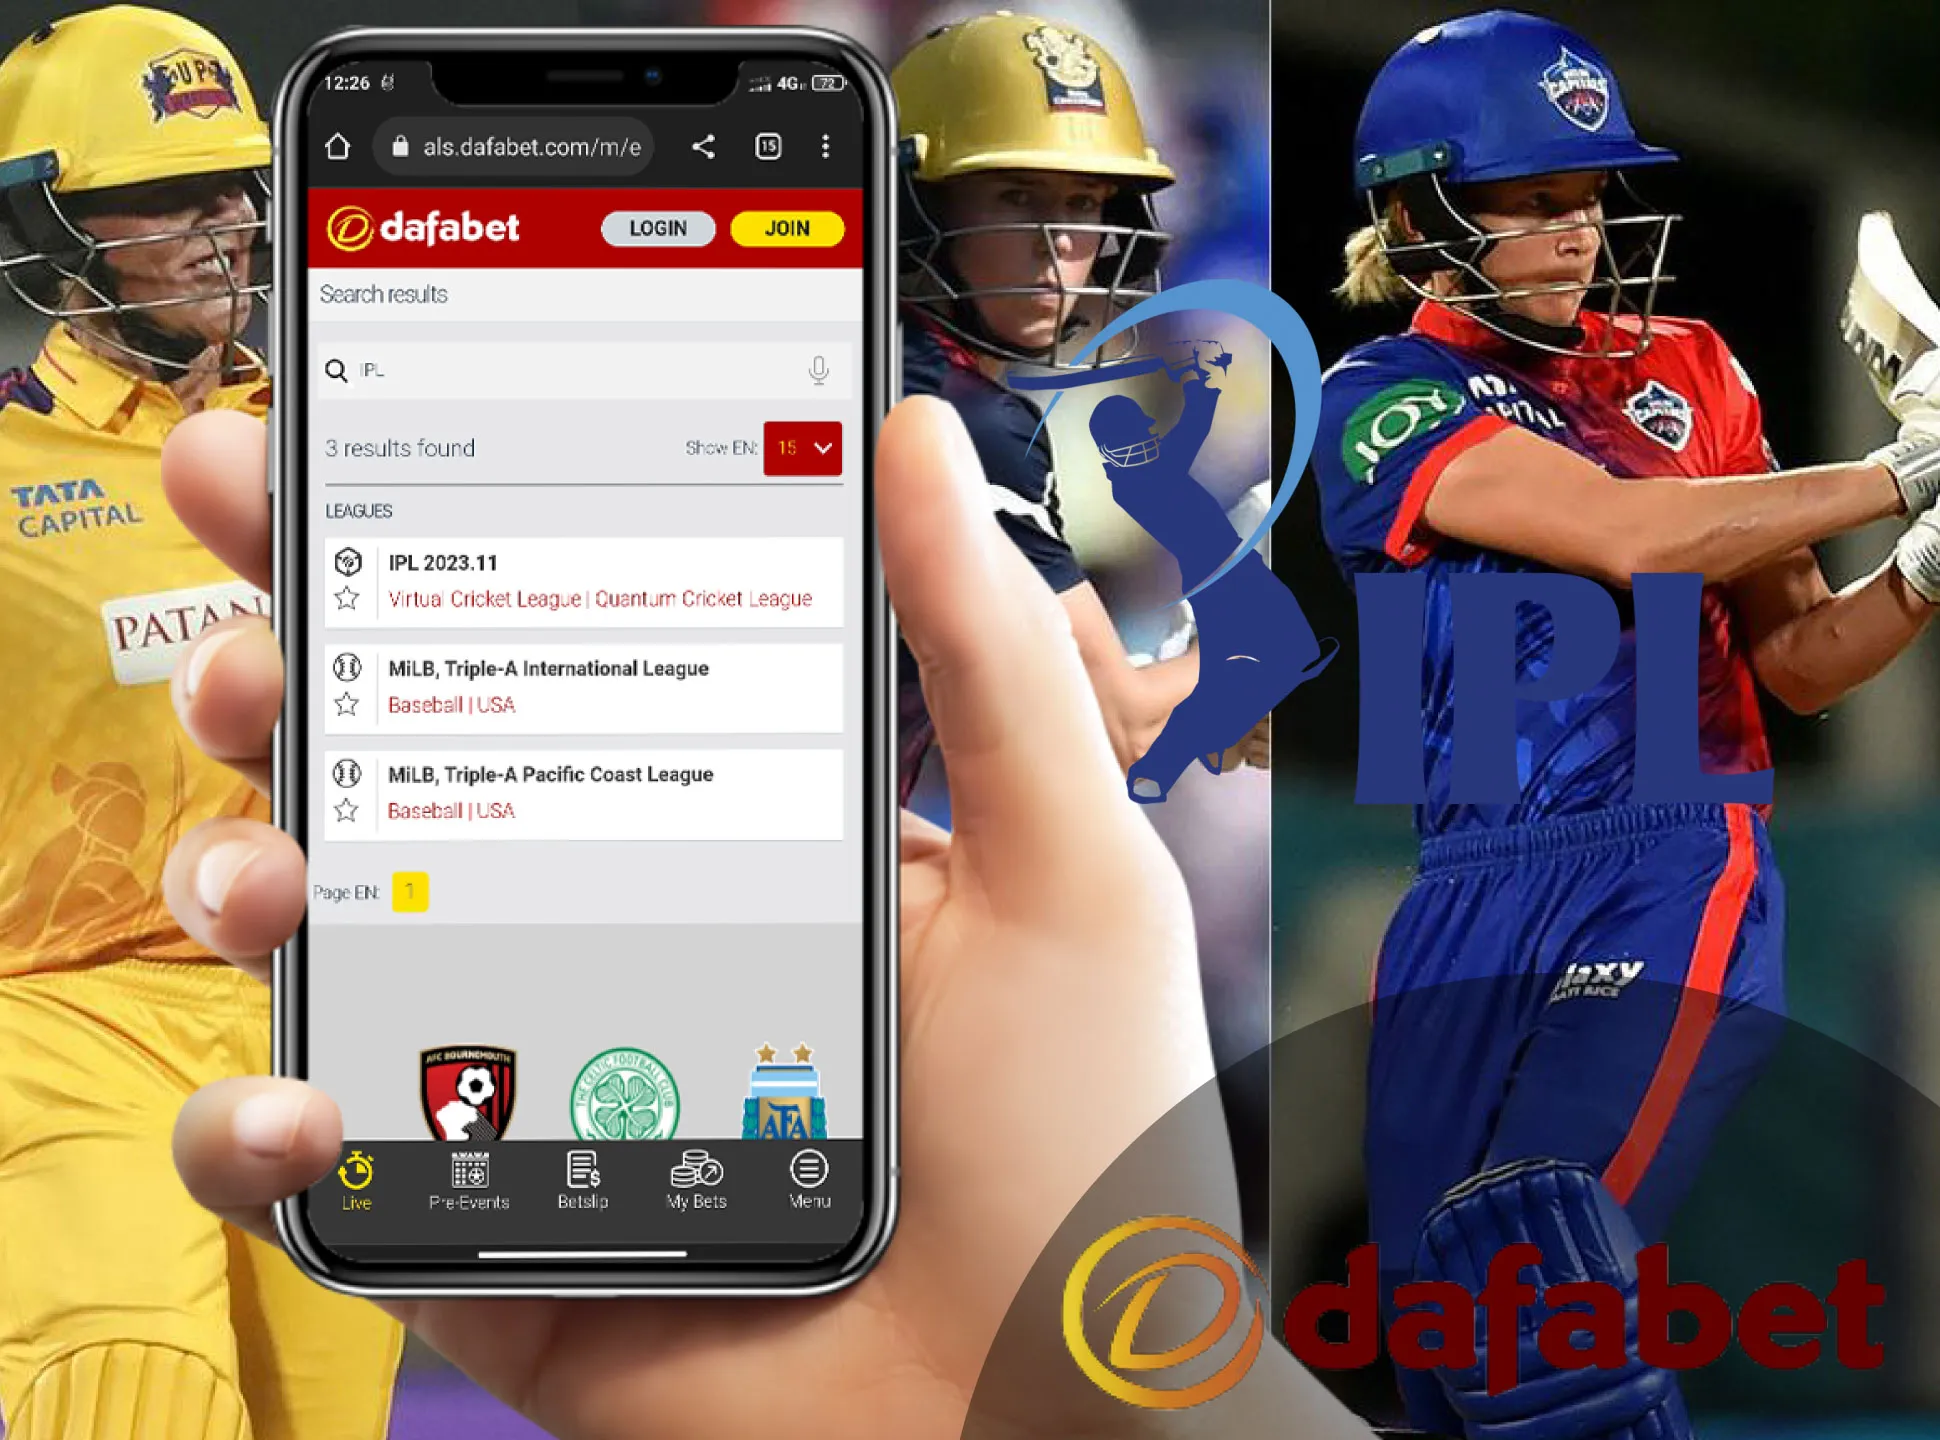 In 2023 you can bet on the favorite IPL team on the Dafabet application.